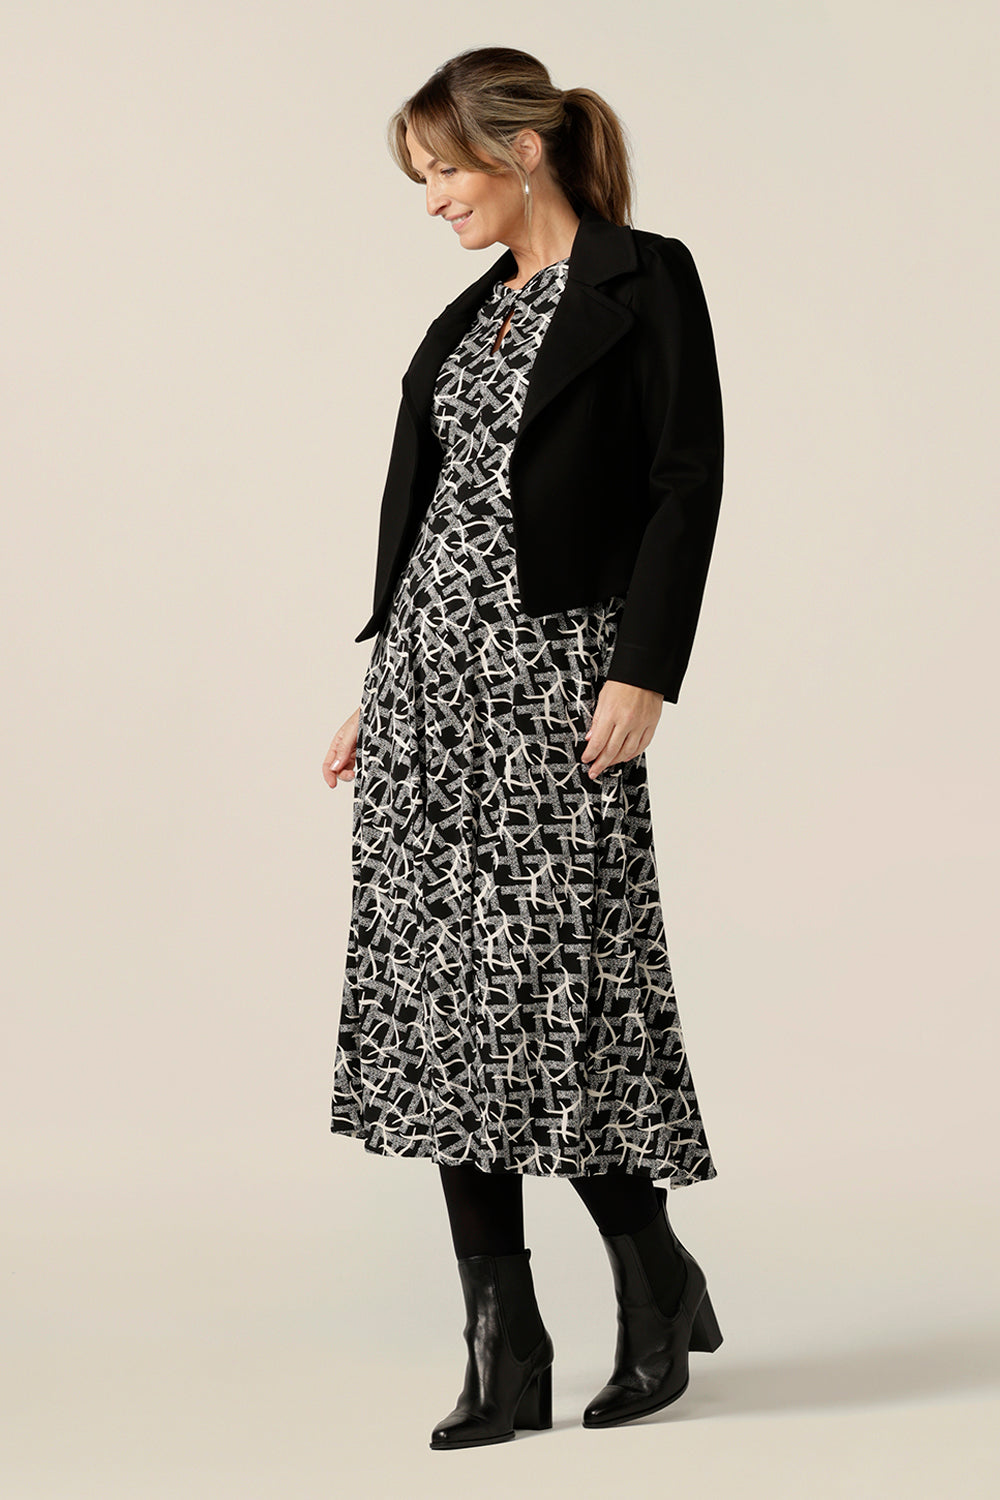 A size 10 woman wears a midi length, long sleeve dress with twisted keyhole detail with a black workwear jacket. Made by Australian and New Zealand women's clothing label, L&F in an inclusive size range of sizes 8 to 24.